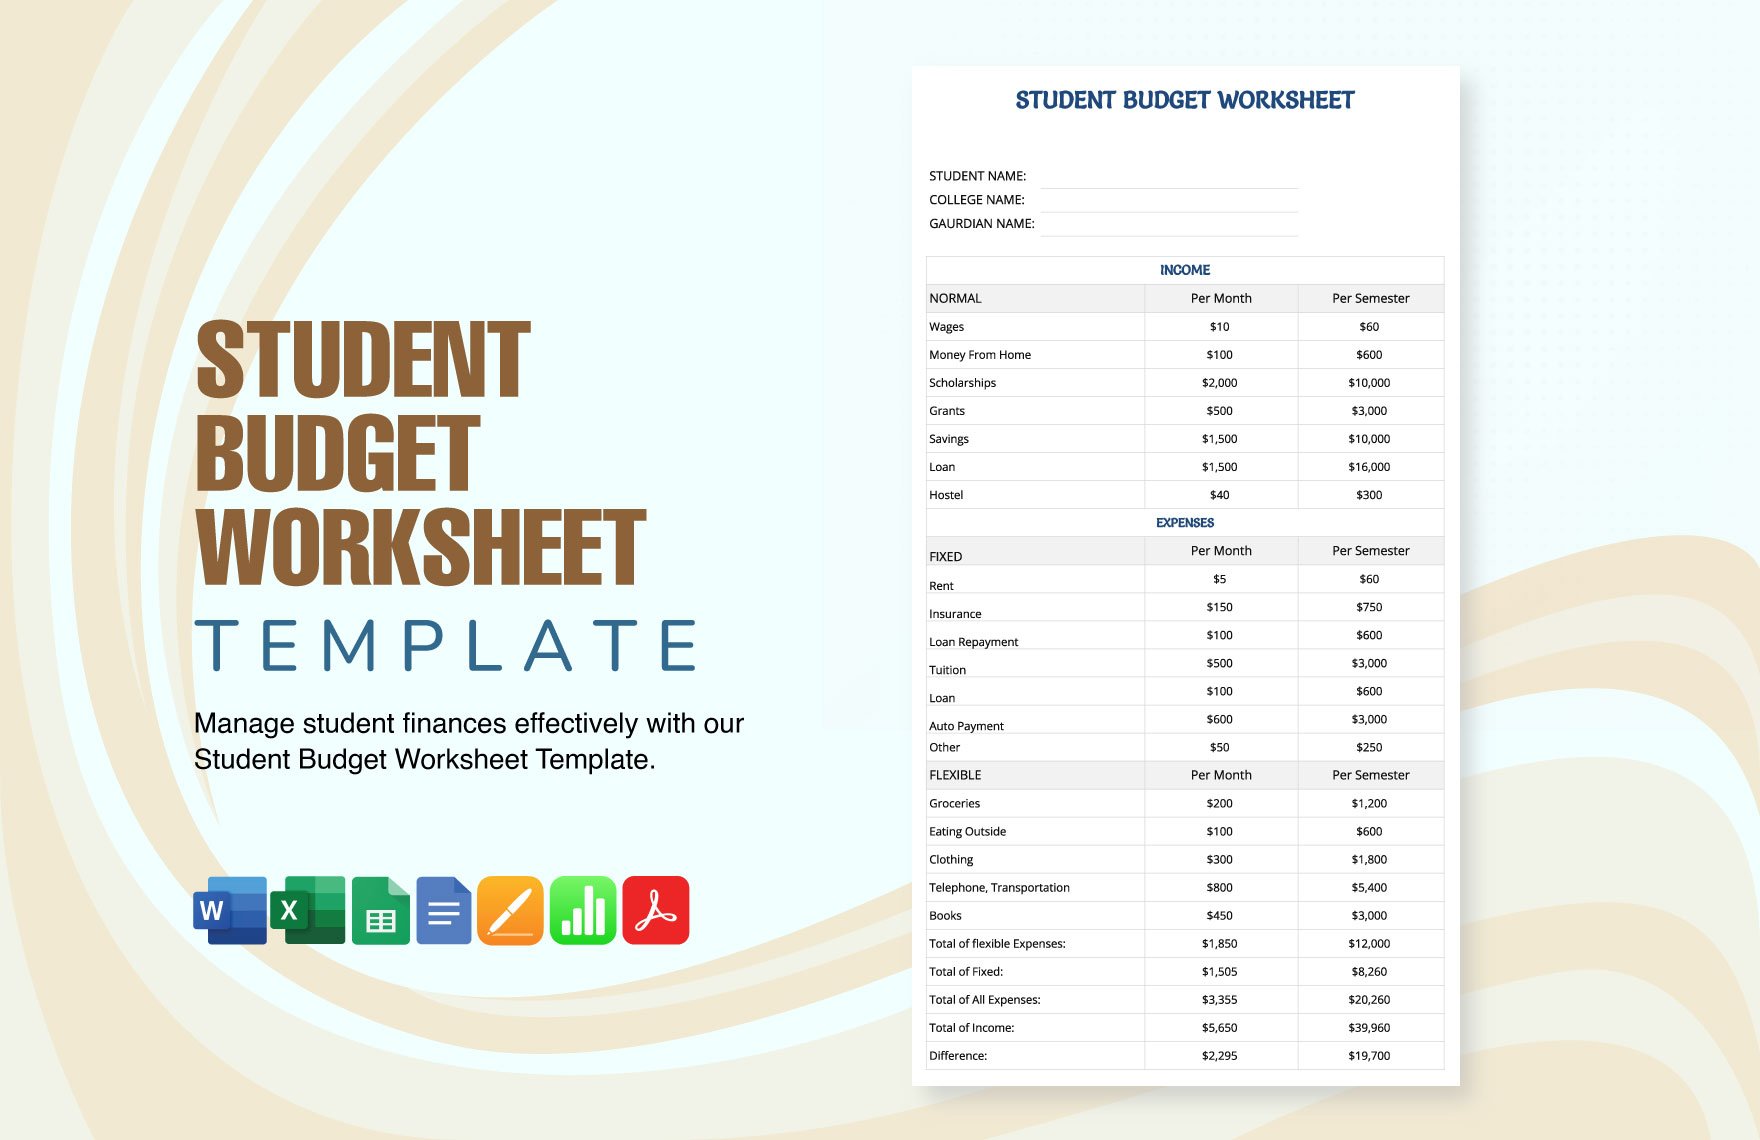 Free Student Budget Worksheet Template in Word, Google Docs, Excel, PDF, Google Sheets, Apple Pages, Apple Numbers